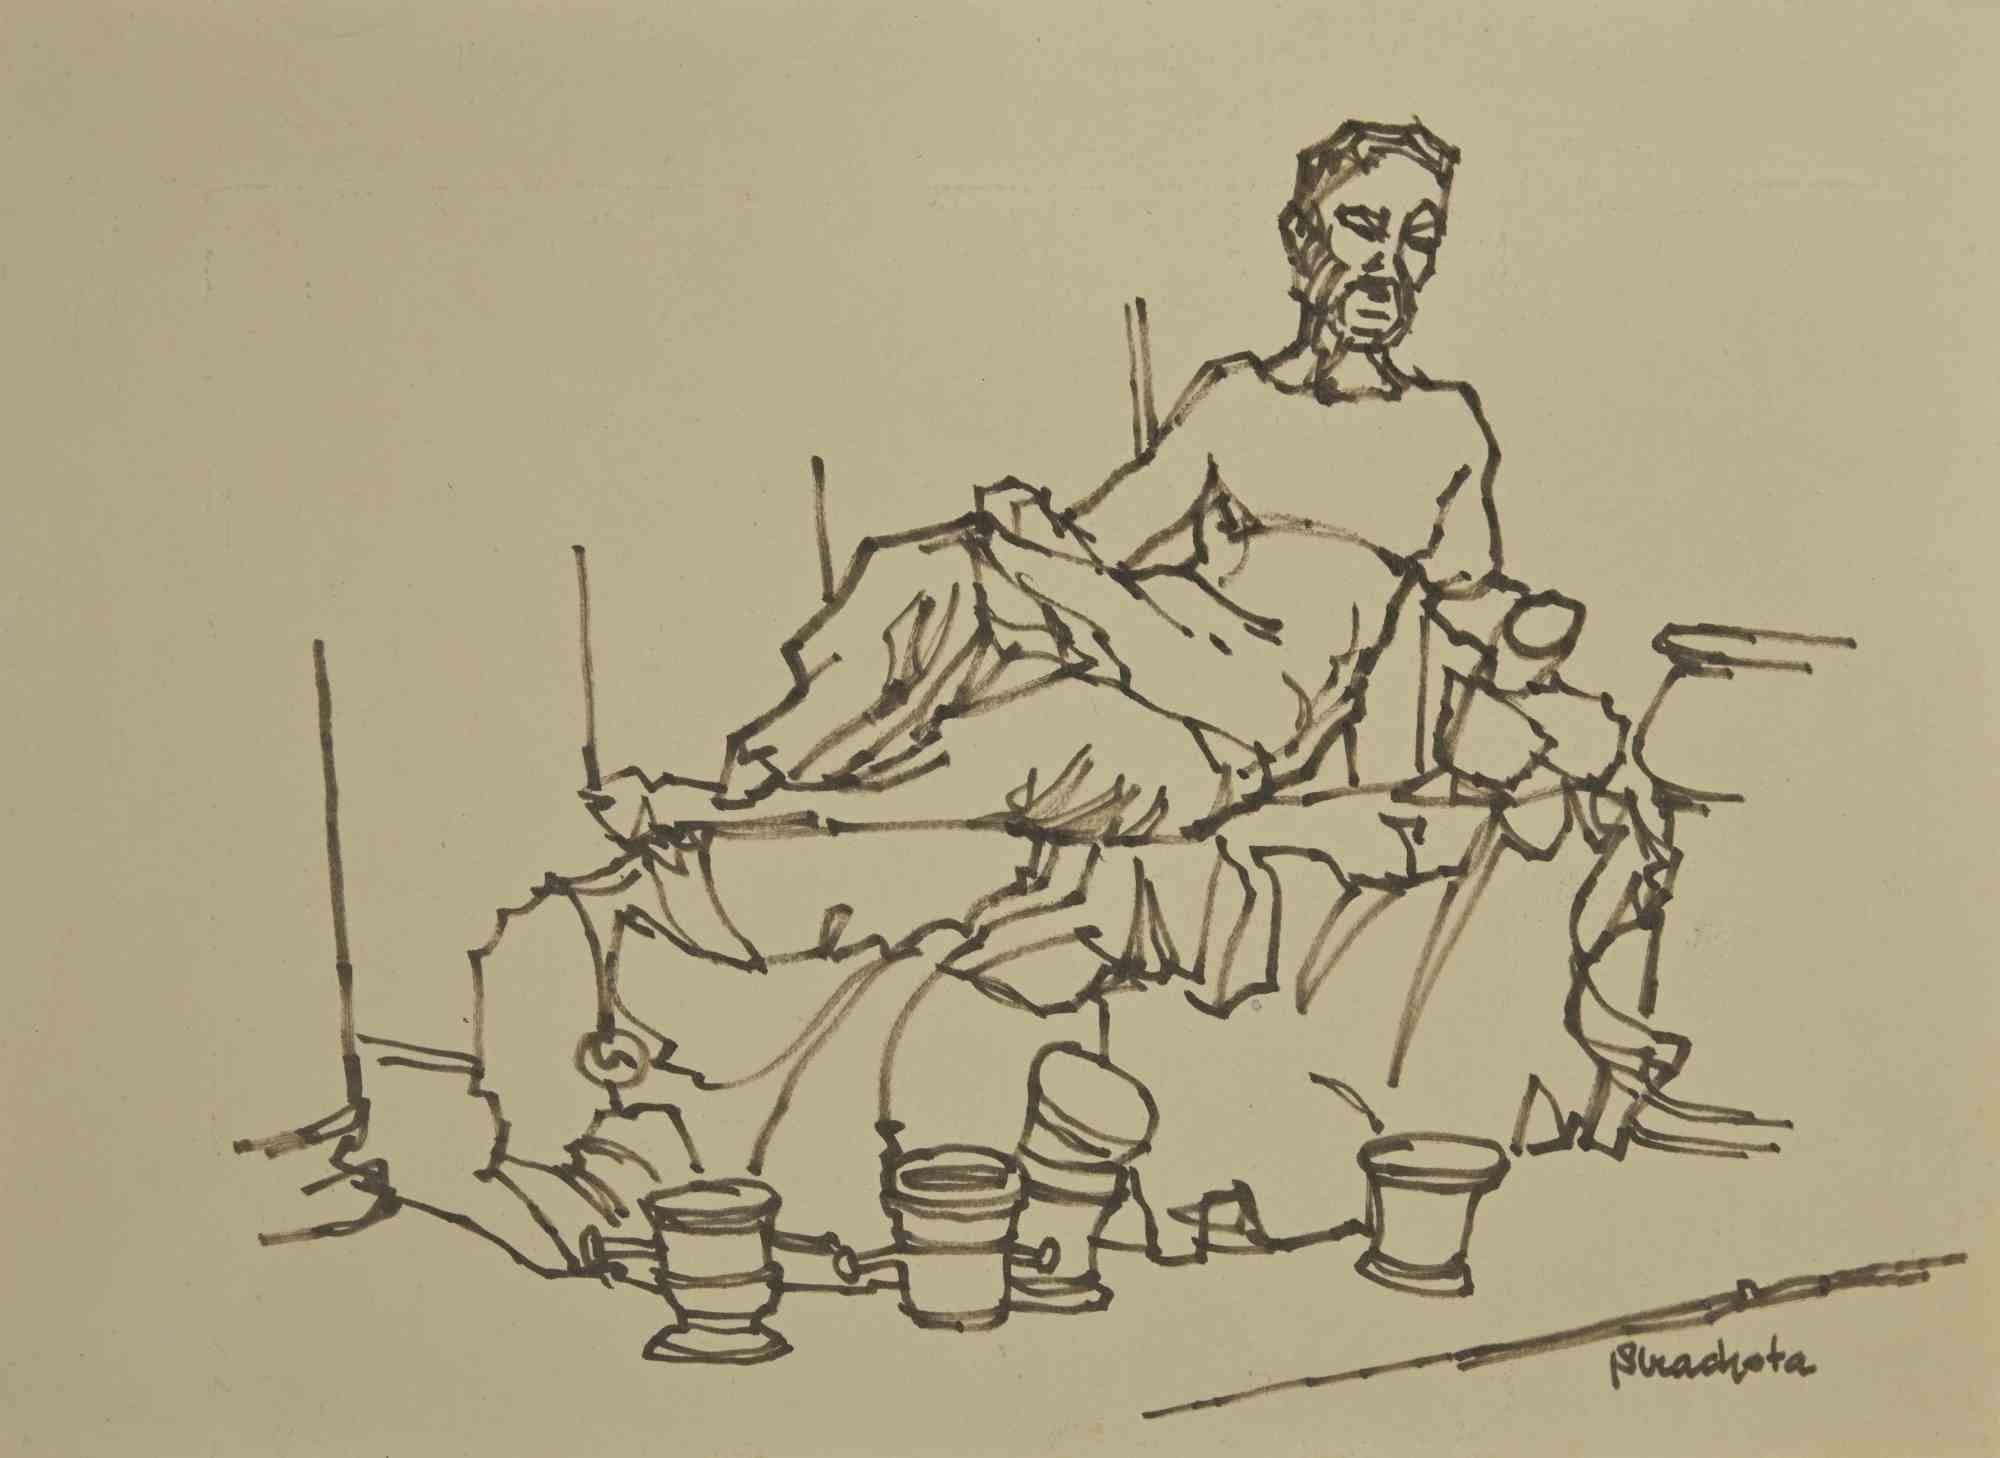 Unknown Figurative Art - The Man in Bed - Black Marker Drawing - Mid-20th Century